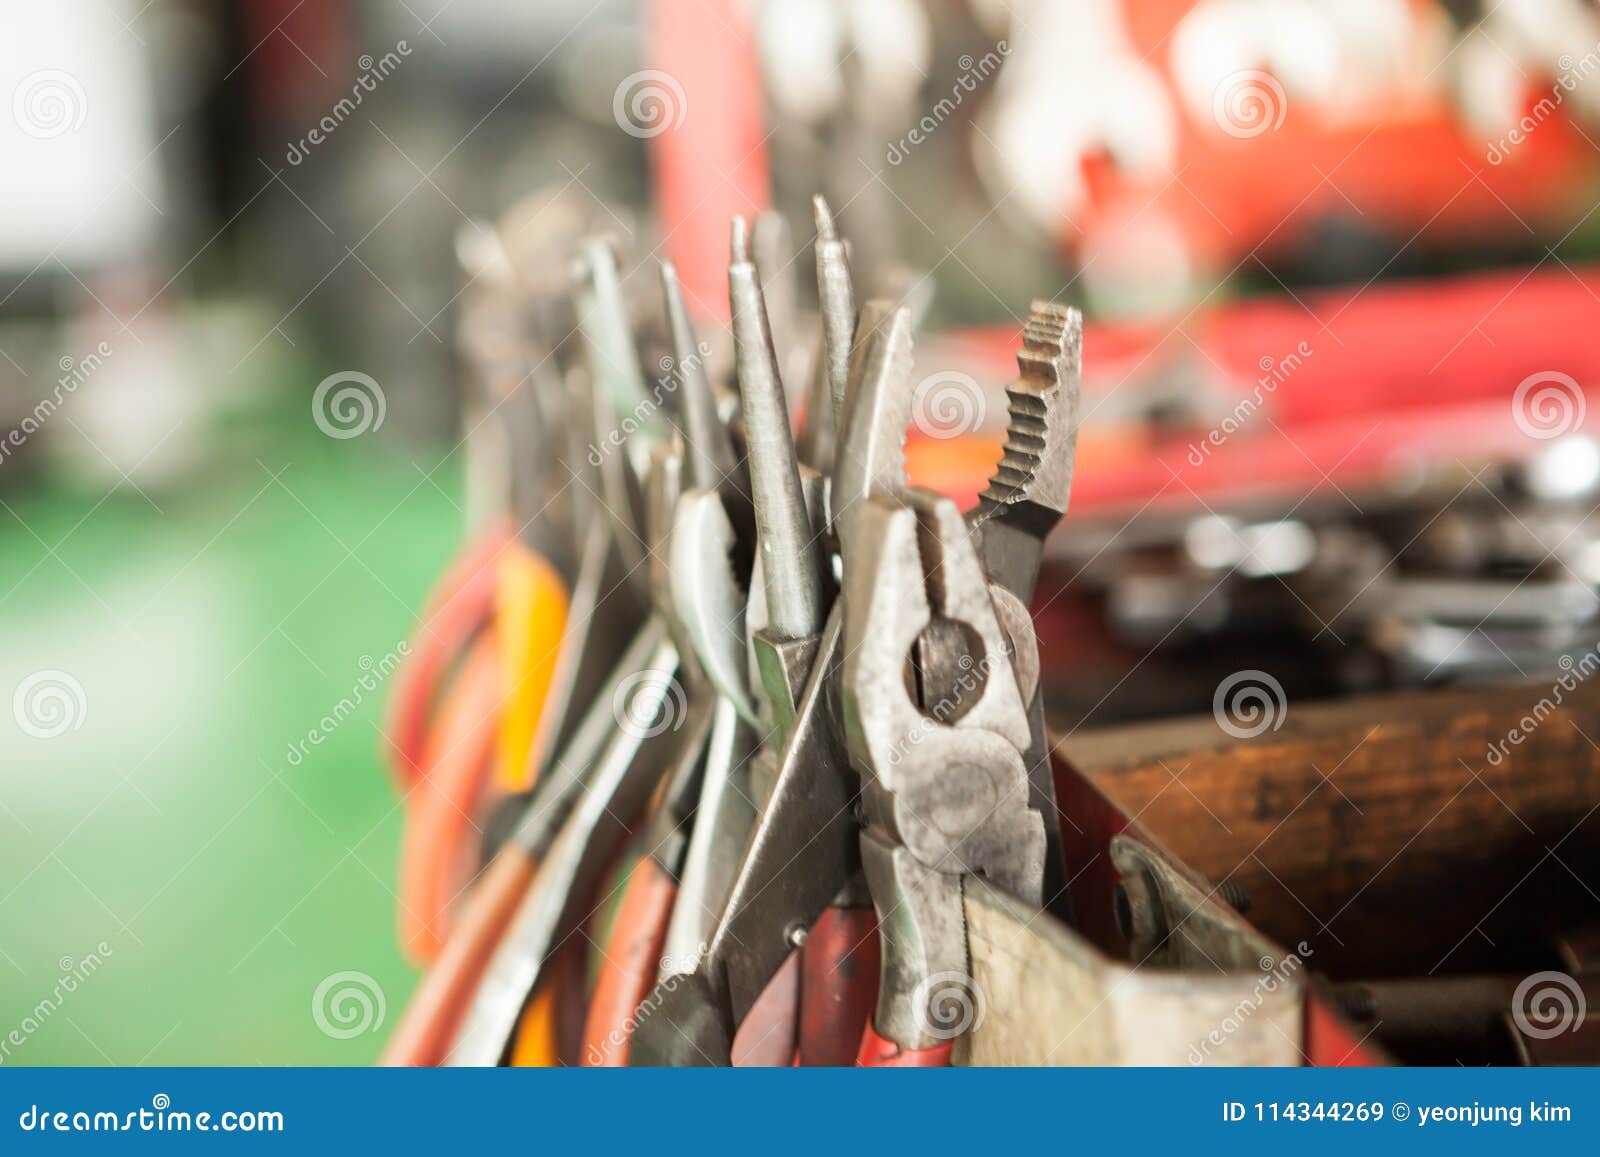 Close-up with red car toolbox and various repair tools